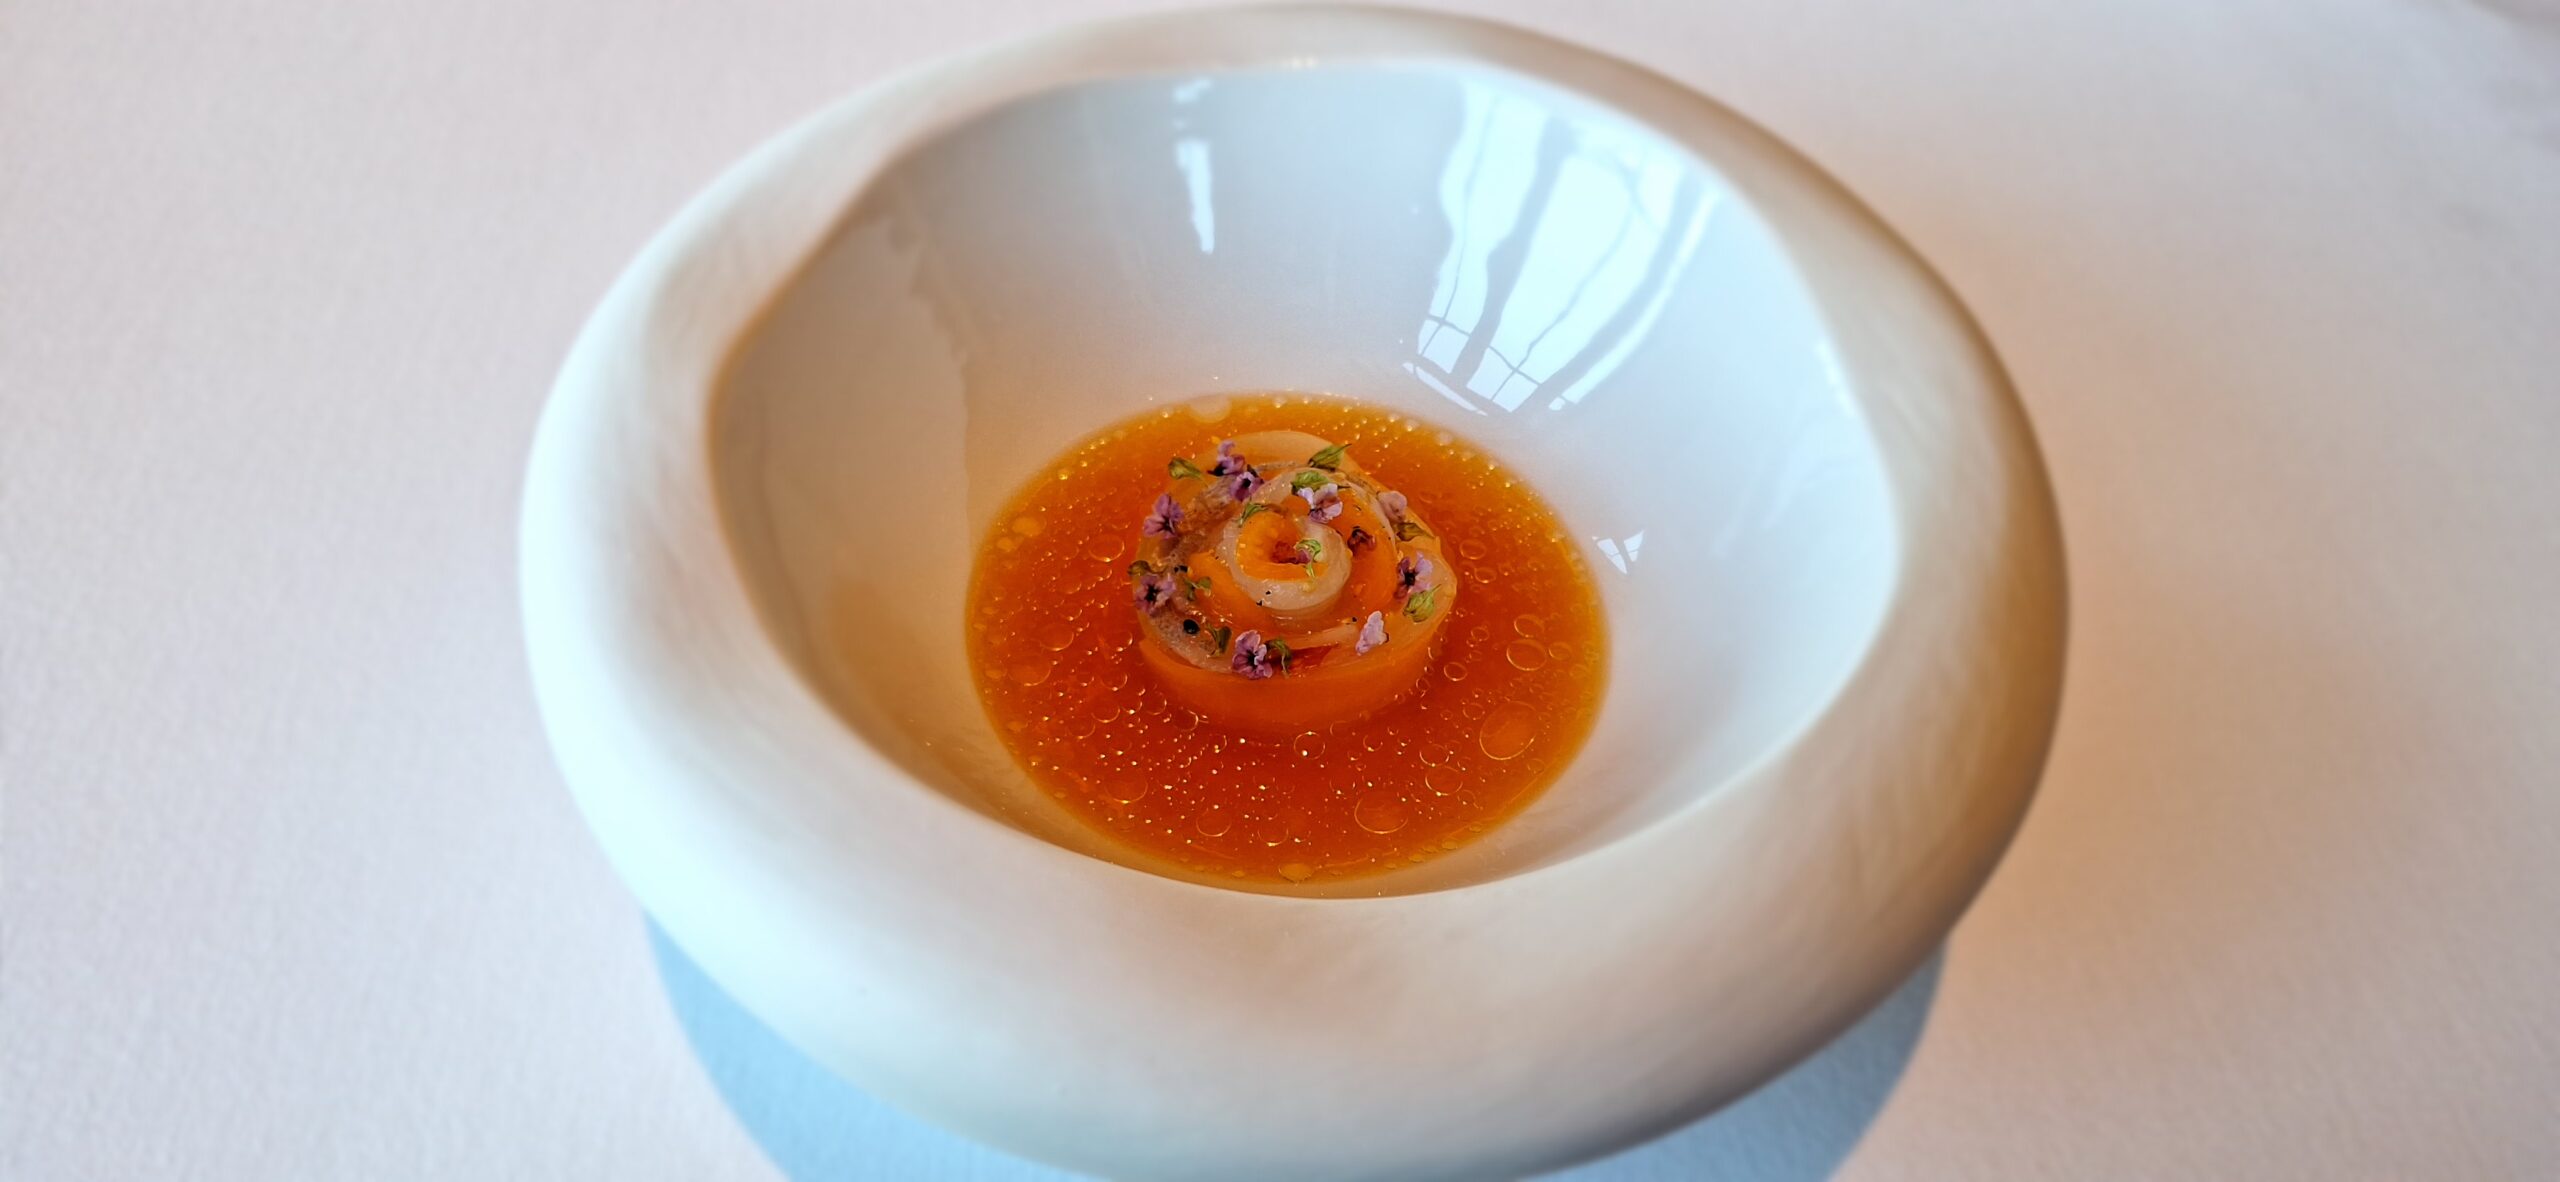 a white bowl with orange liquid and a spiral object in it